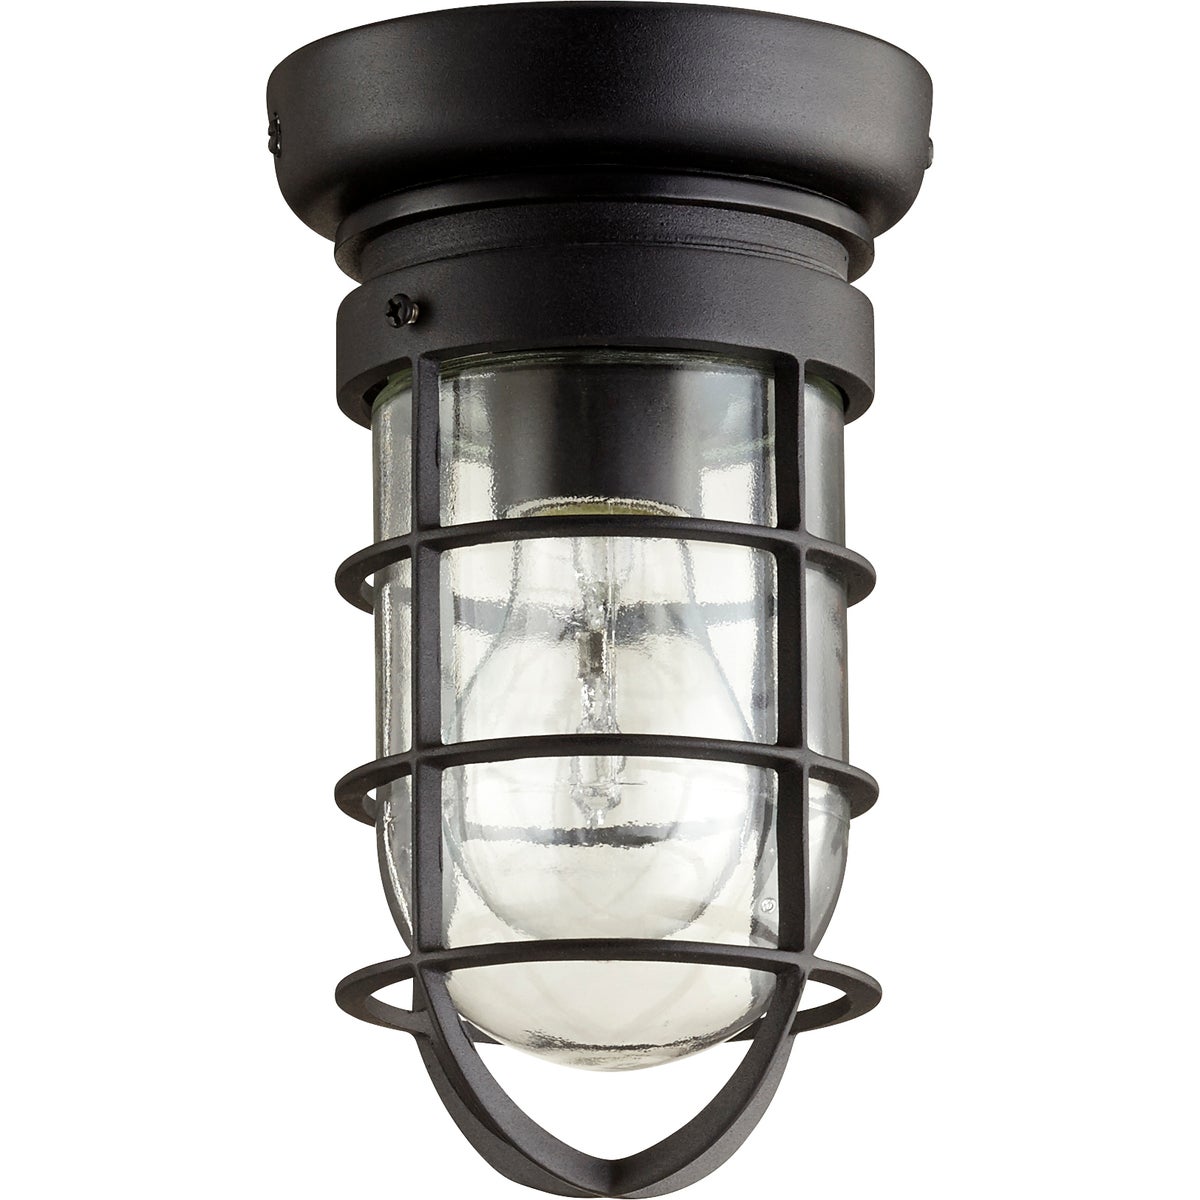 Coastal outdoor ceiling light with clear glass shade and cage enclosure, perfect for coastal and rustic outdoor settings. Adds exceptional style and welcoming light to home exteriors. Install on porch, deck, or balcony for eye-catching illumination. Quorum International brand. 60W, 120V, UL Listed, wet location safety rating. Dimensions: 4.5&quot;W x 8.25&quot;H. 2-year warranty.